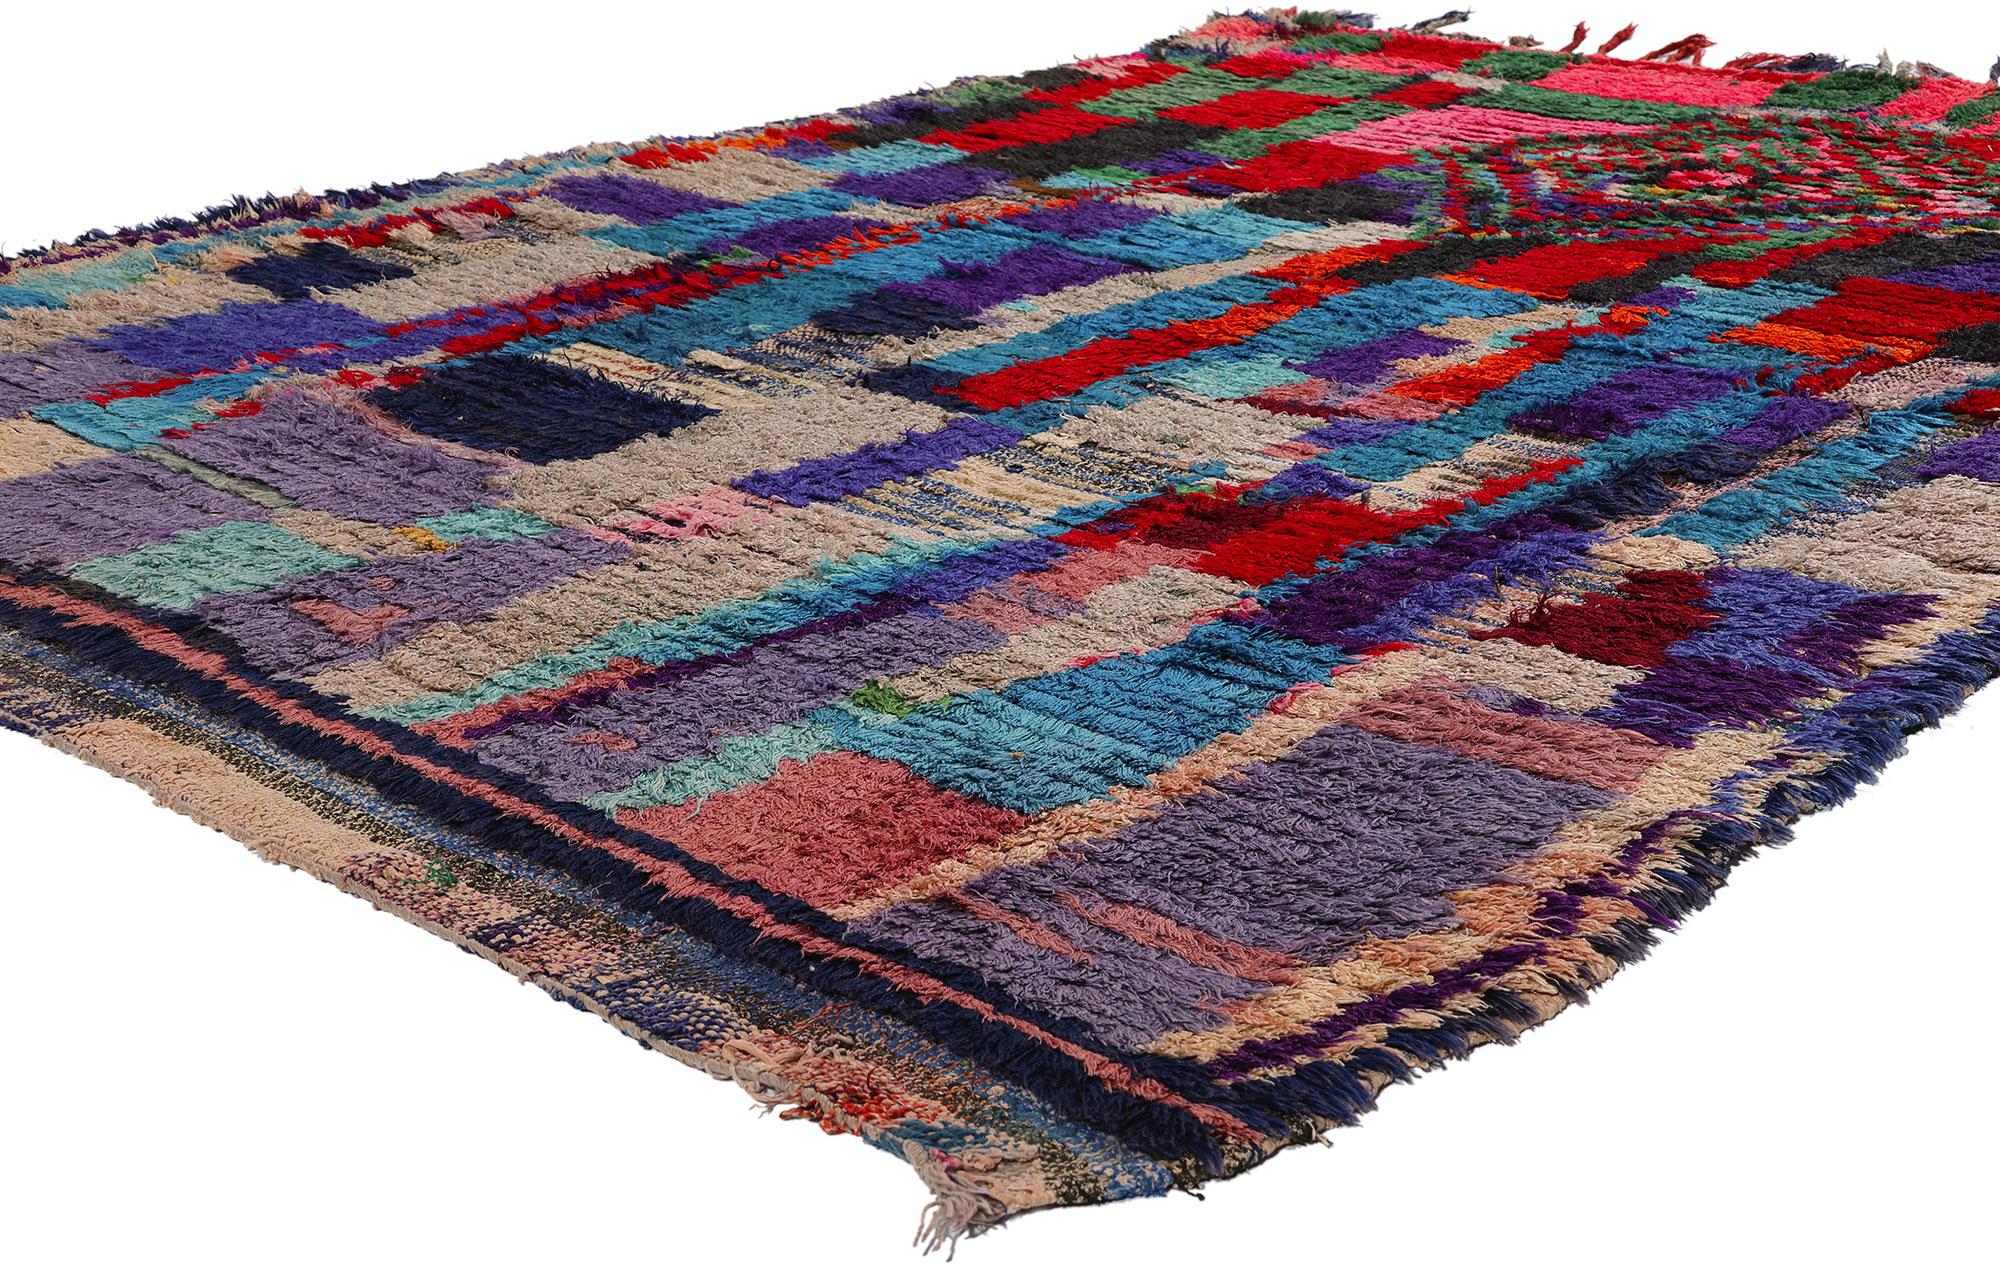 21742 Colorful Vintage Boucherouite Moroccan Azilal Rag Rug, 05'00 x 07'04. Azilal rag rugs, hailed as Azilal Boucherouite masterpieces, embark on a vivid journey of sustainable artistry resonating from the heart of the Azilal region in the Atlas